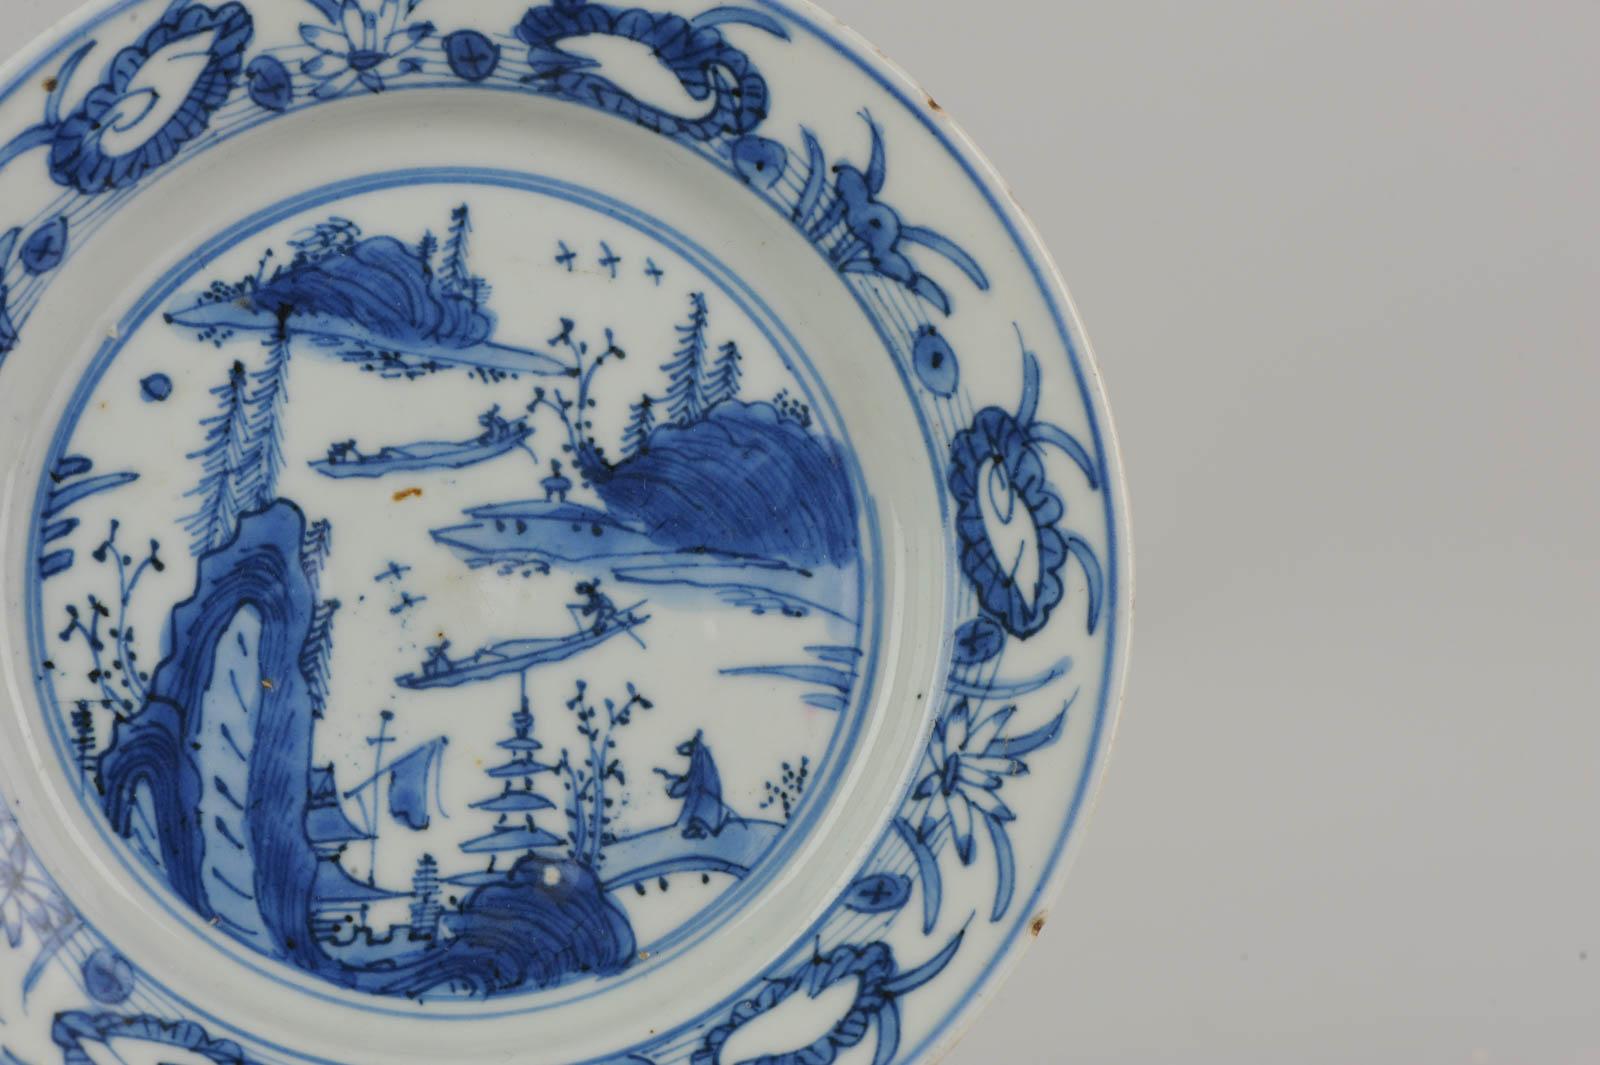 Antique Chinese Porcelain Ming 1540-1580 Jiajing Wanli Landscape Plate with Bird For Sale 5